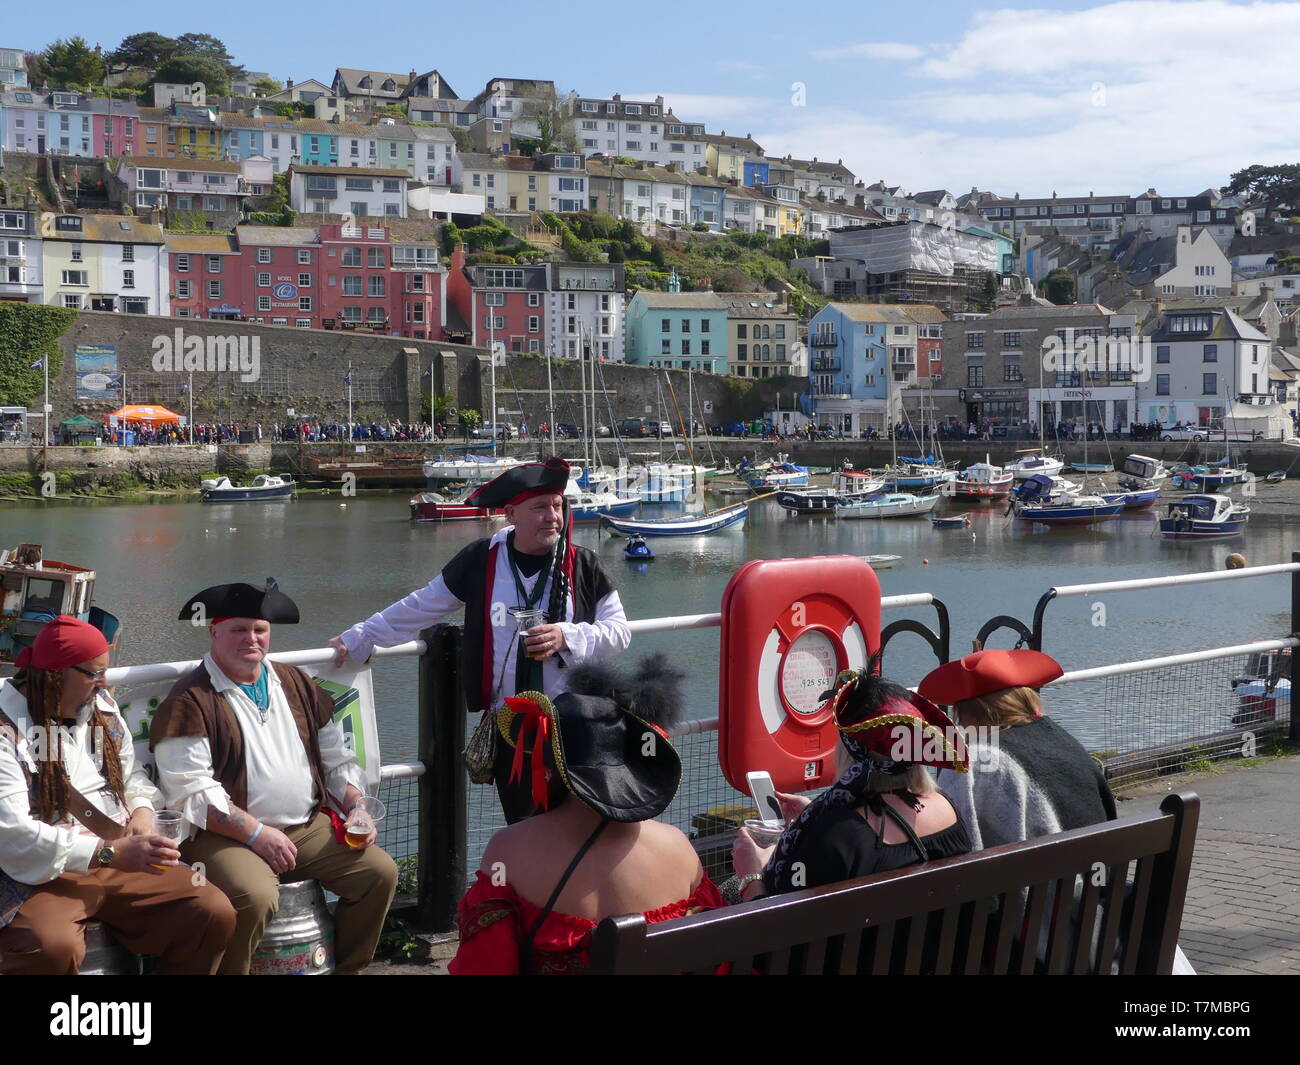 Brixham, UK - 5 May 2019: The 13th Annual Pirate Festival taking place in Brixham, devon, UK. Pirates, rum and music during this 3 day festival. Stock Photo